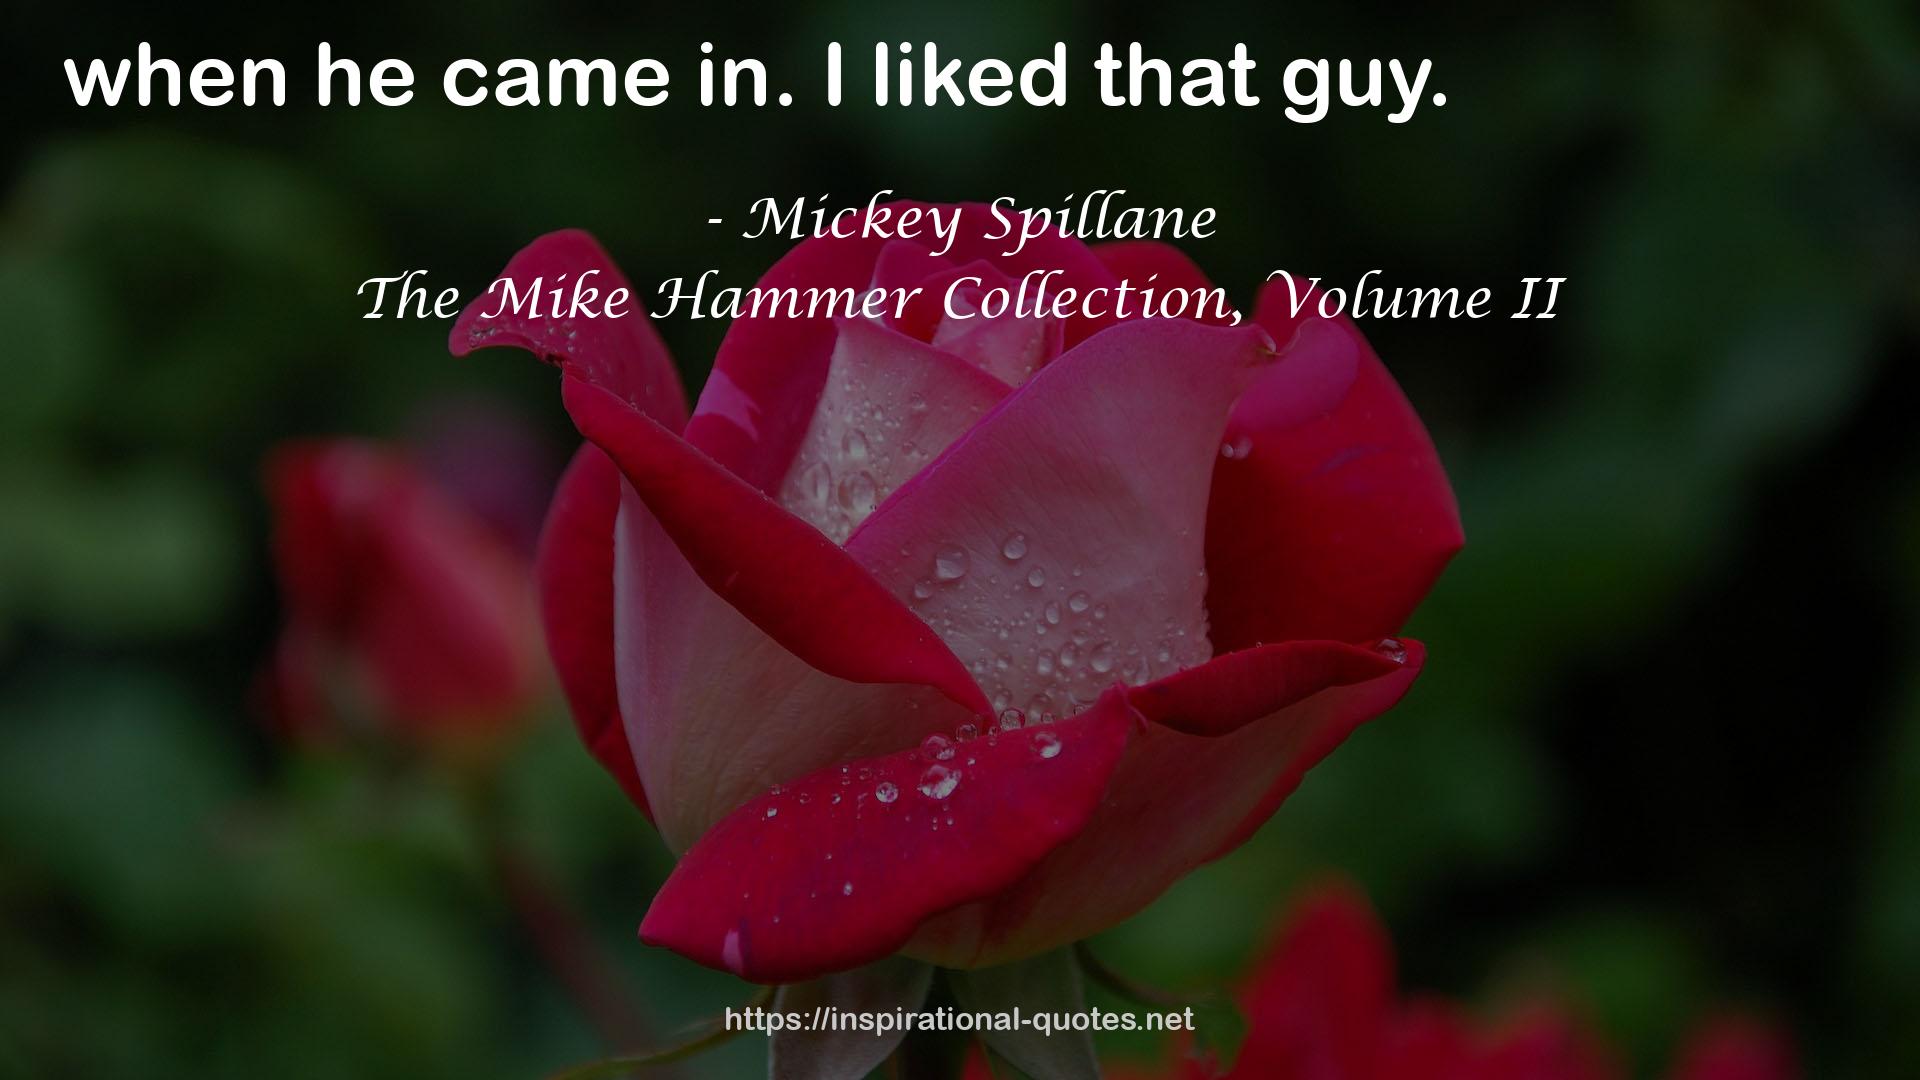 The Mike Hammer Collection, Volume II QUOTES